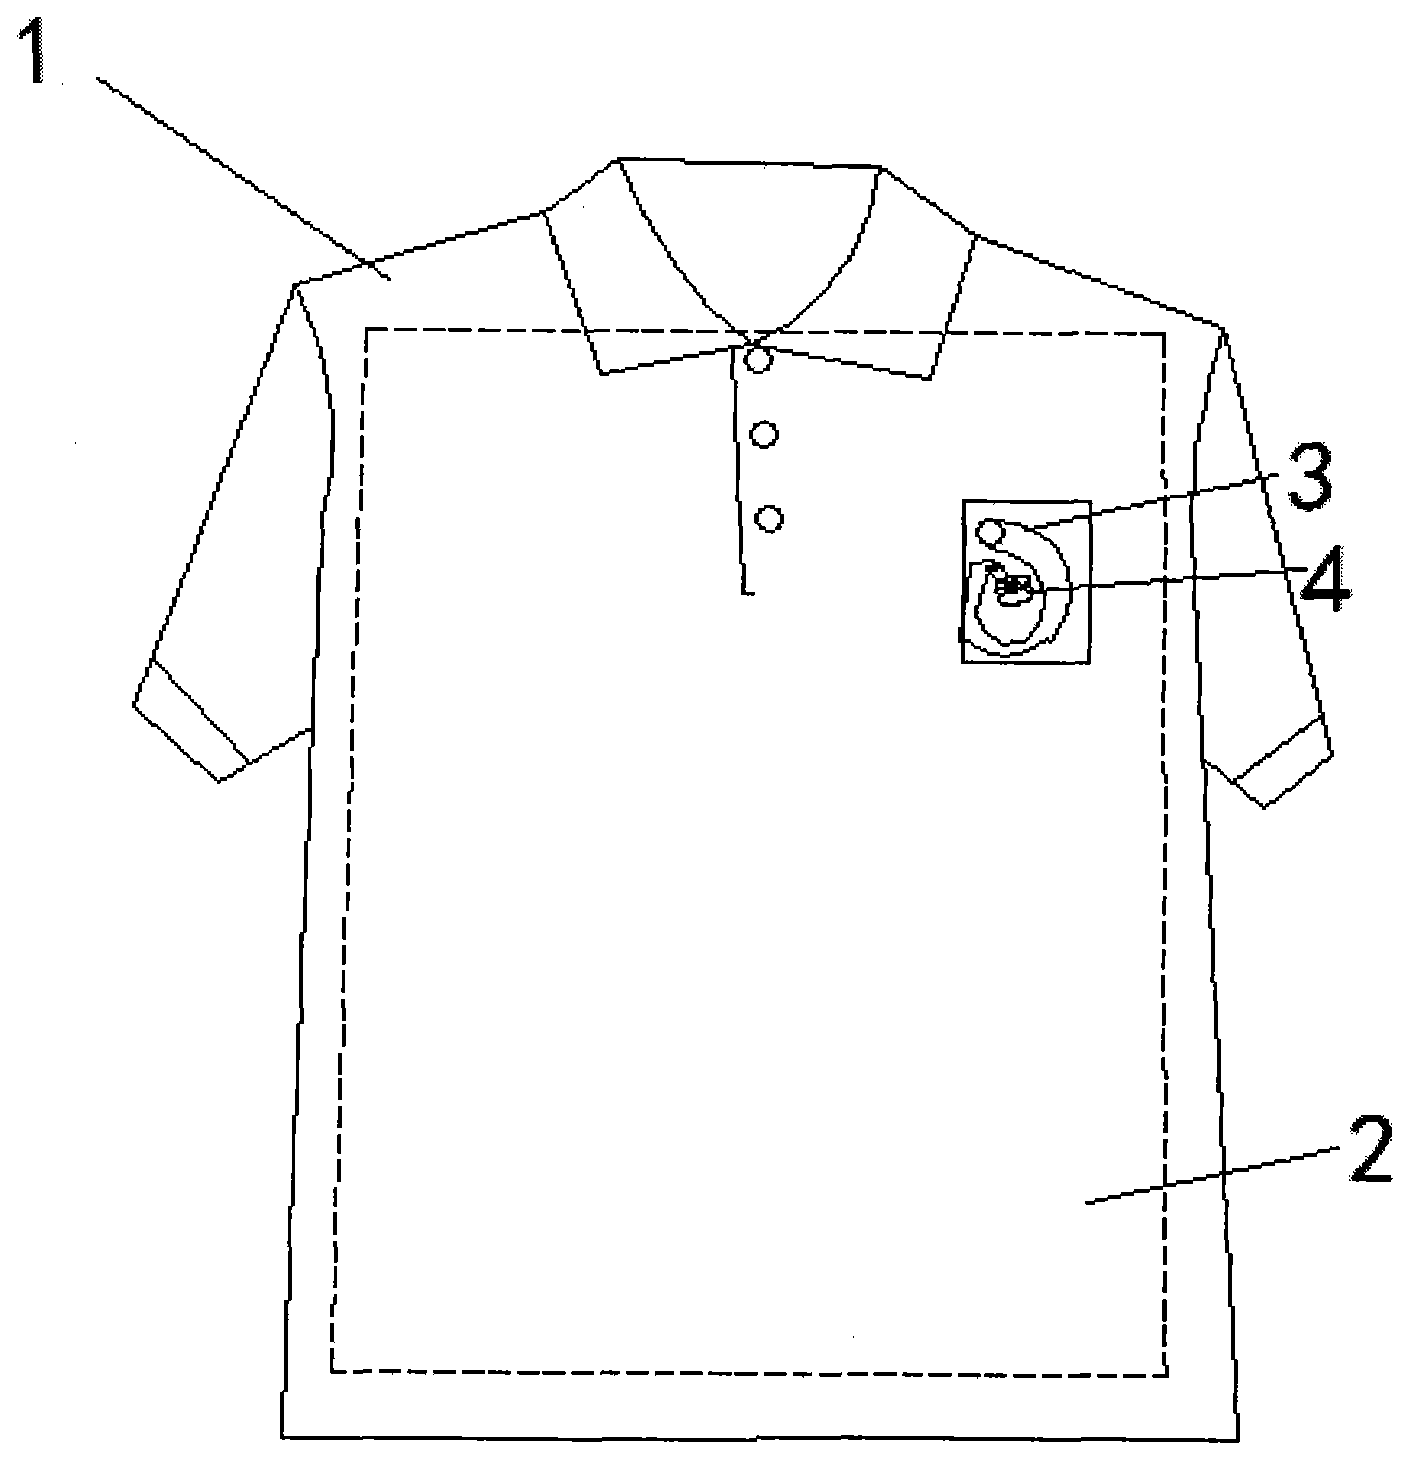 Light-transmitting and air-permeable garment with inflatable bags